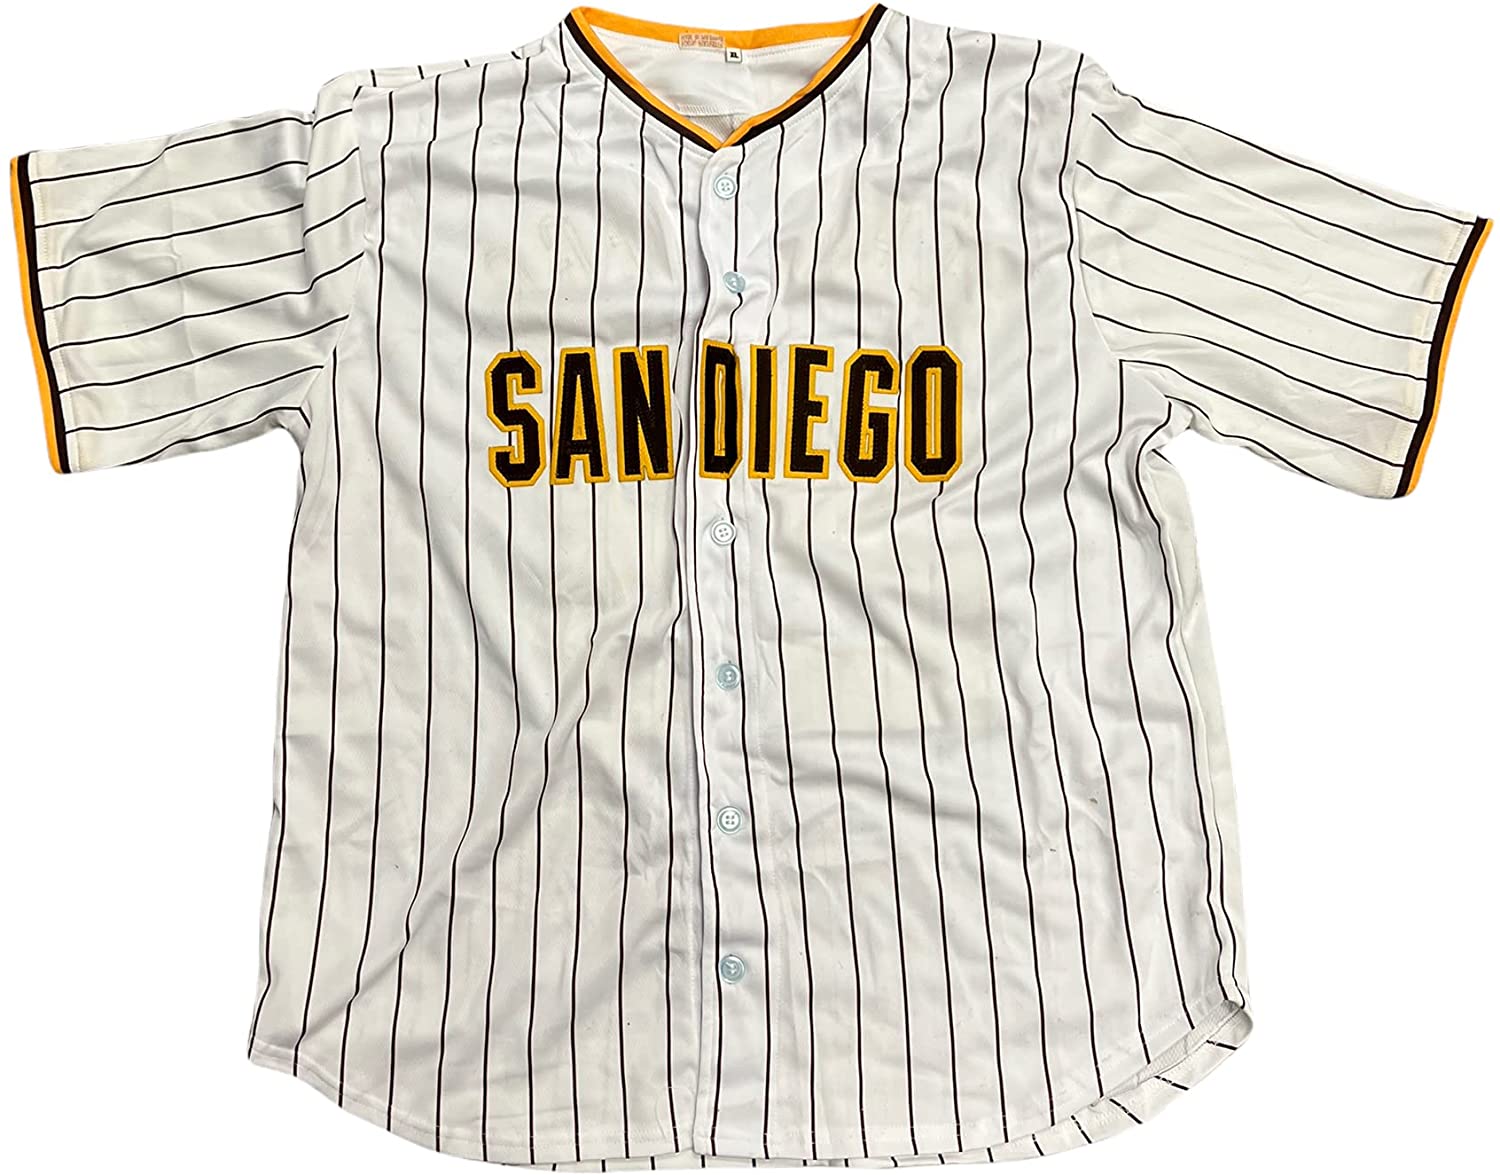 slam diego padres jersey